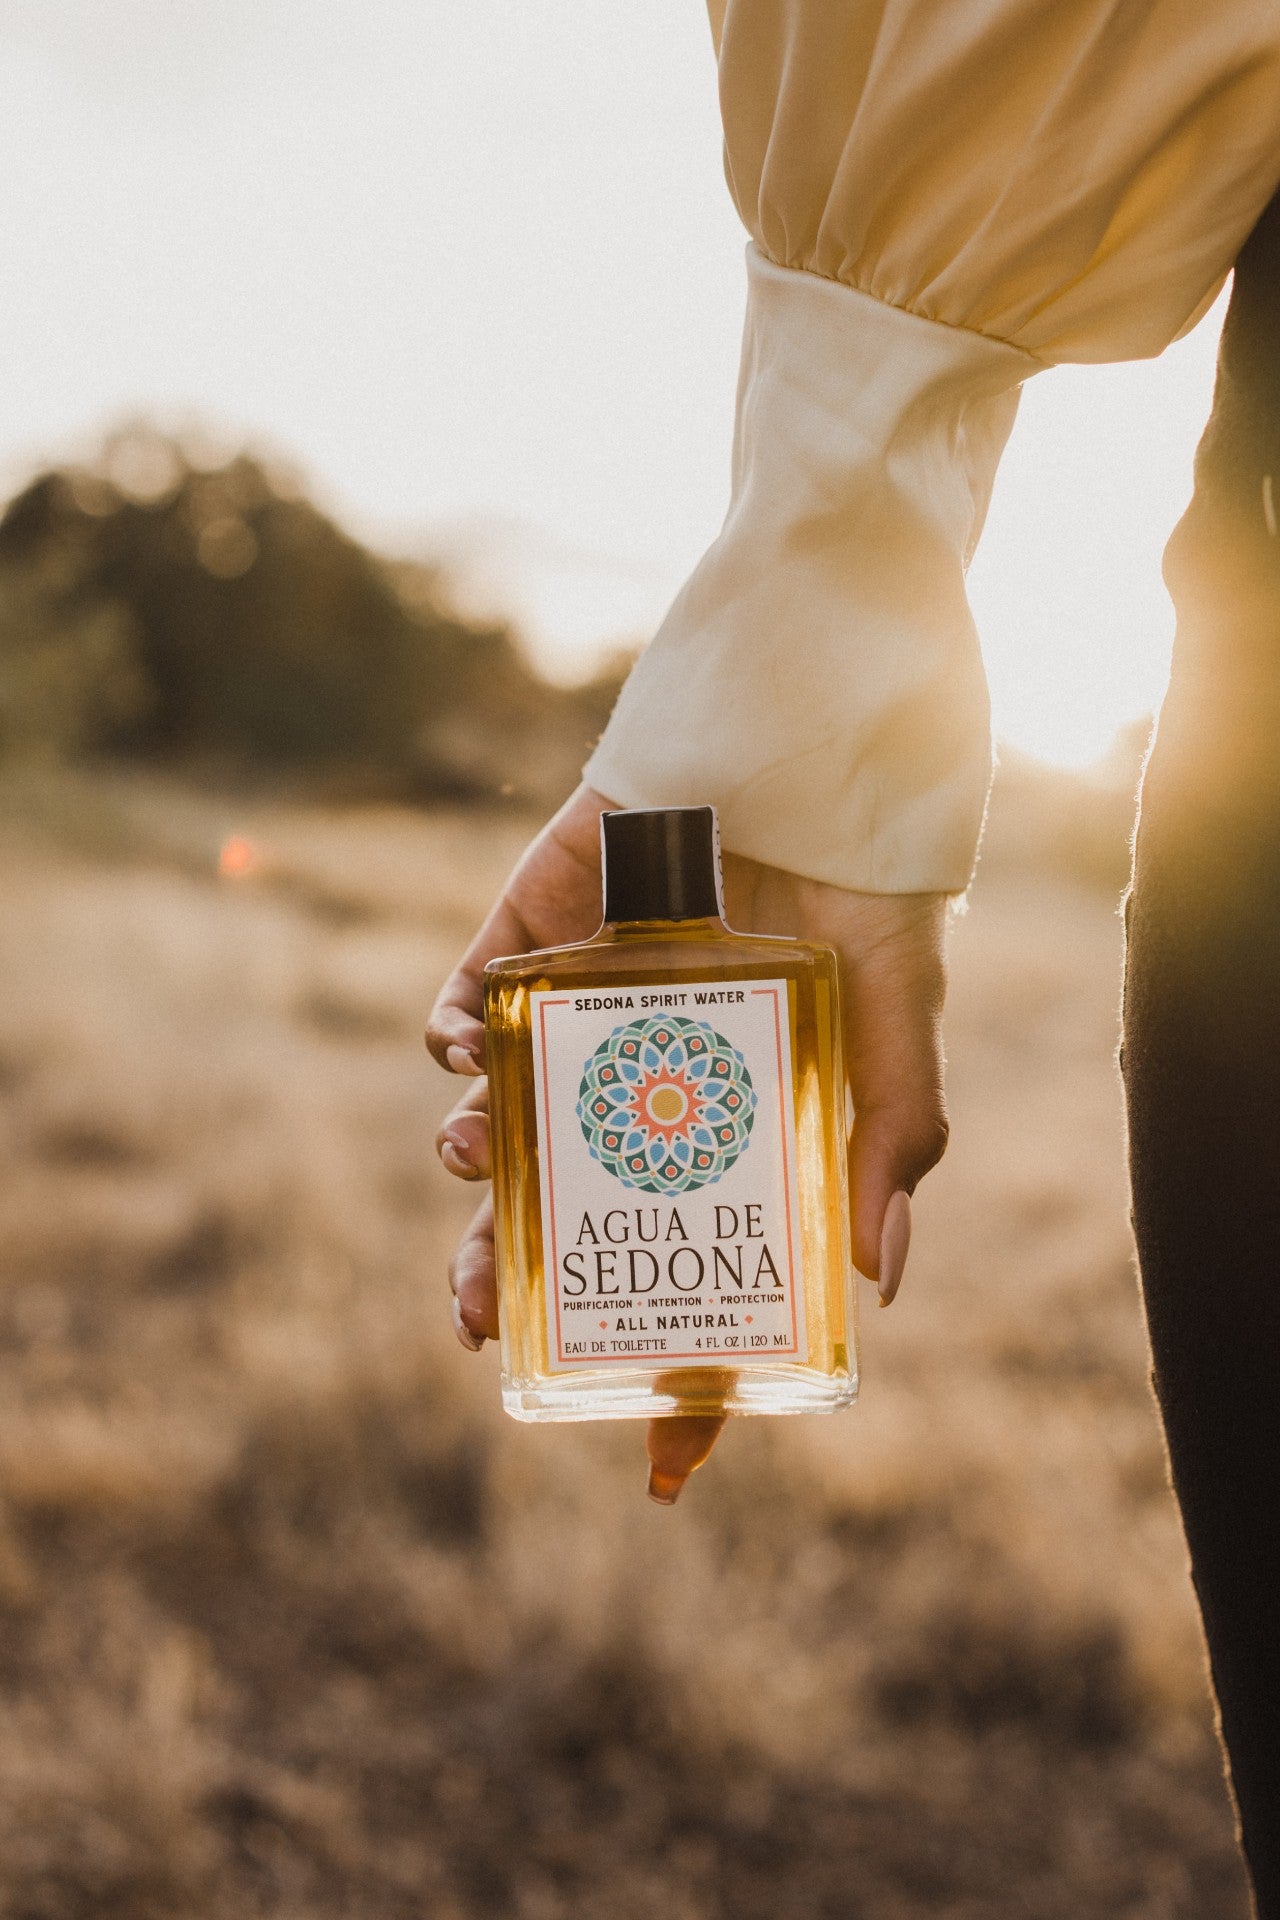 Sedona Spirit Water | Home of Agua de Sedona - All natural, boutique, handcrafted eau de toilettes, perfumes and colognes. Made in Sedona, AZ. The quintessential perfume of Sedona, AZ.  The Spirit of Sedona in a Bottle.